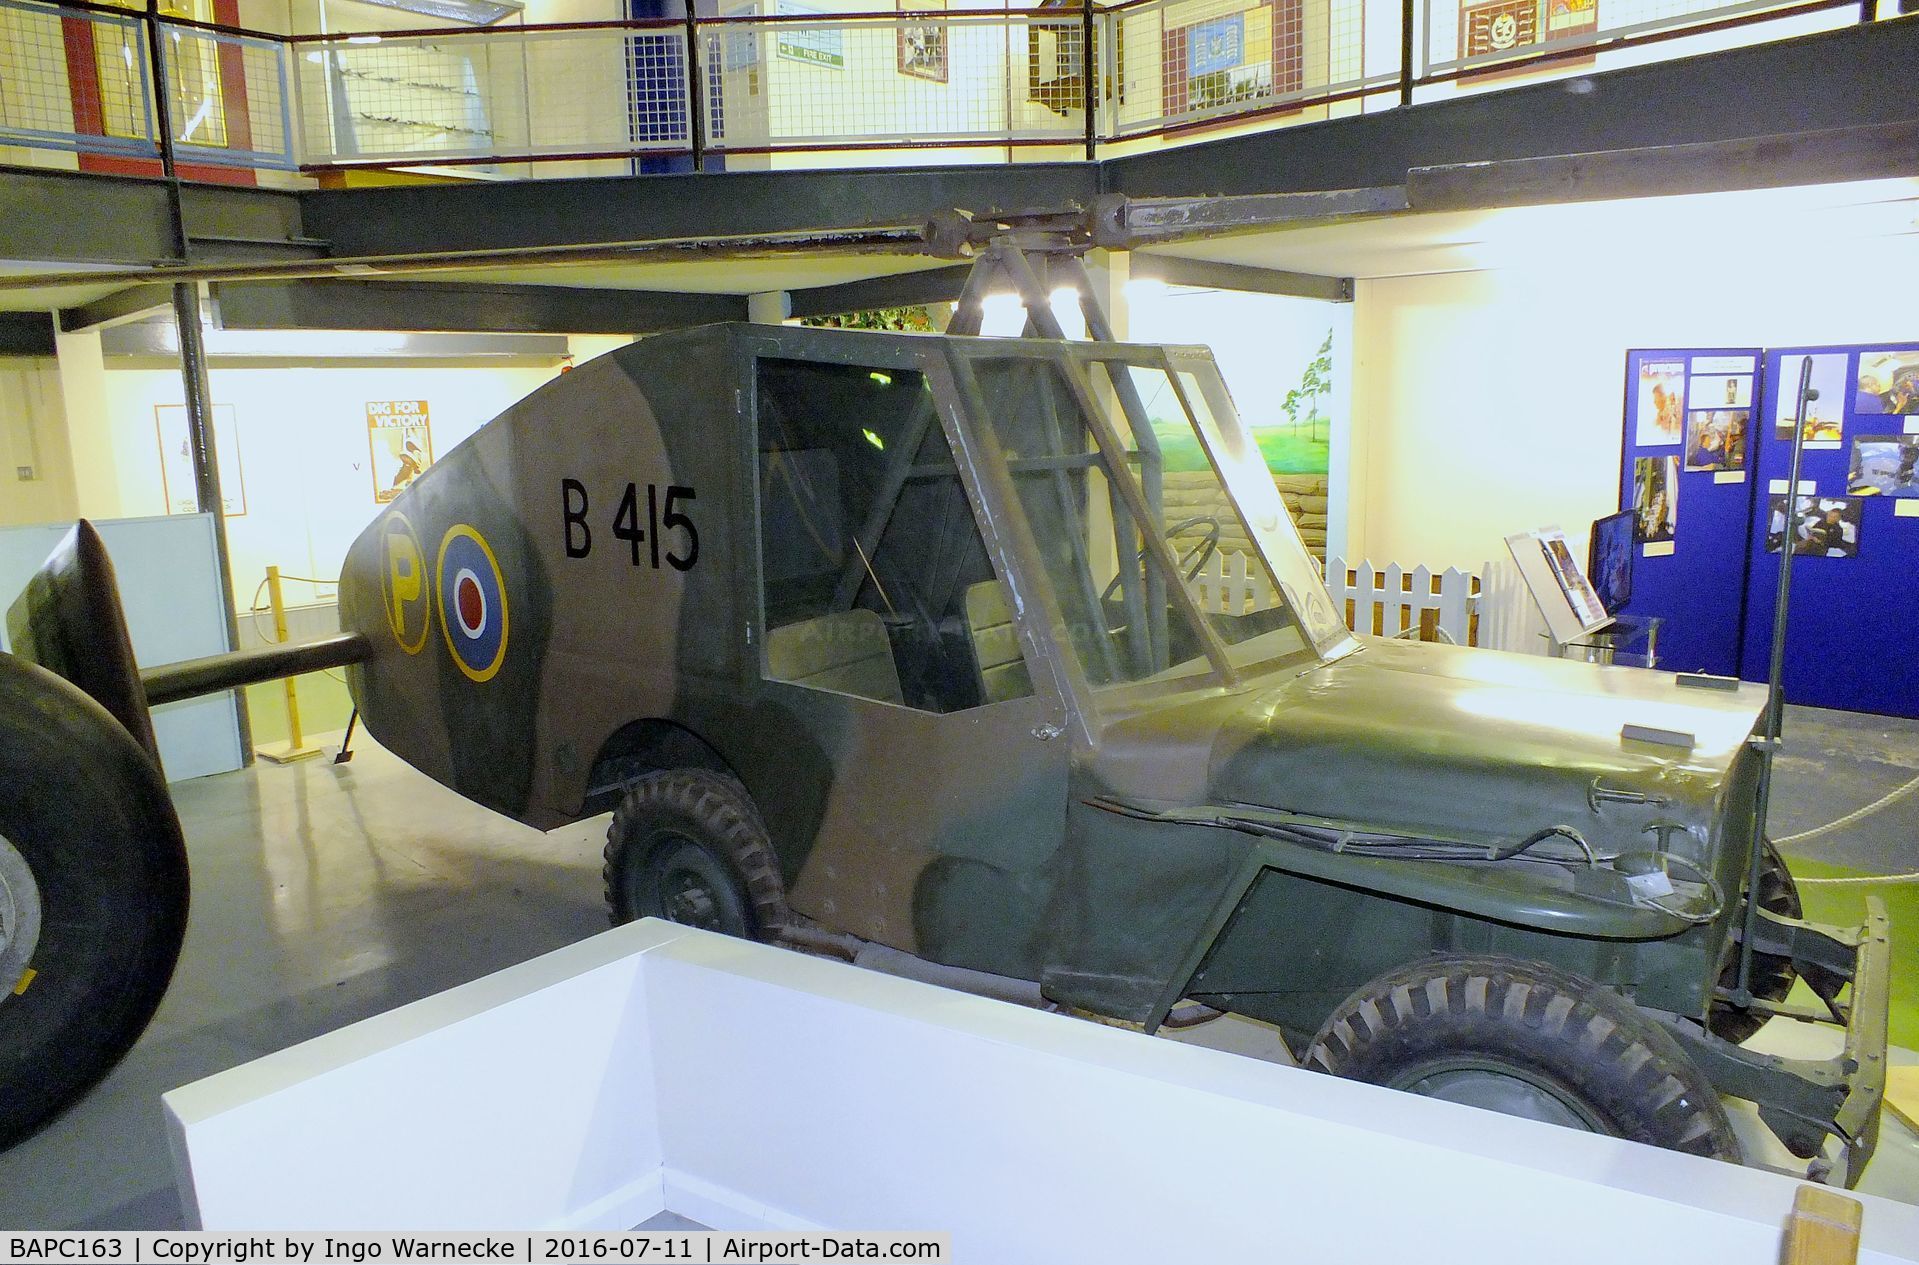 BAPC163, 1942 Hafner AFEE 10/42 Rotabuggy C/N BAPC.163, Hafner Rotabuggy / Malcolm Rotaplane / M.L. 10/42 Flying Jeep at the Museum of Army Flying, Middle Wallop